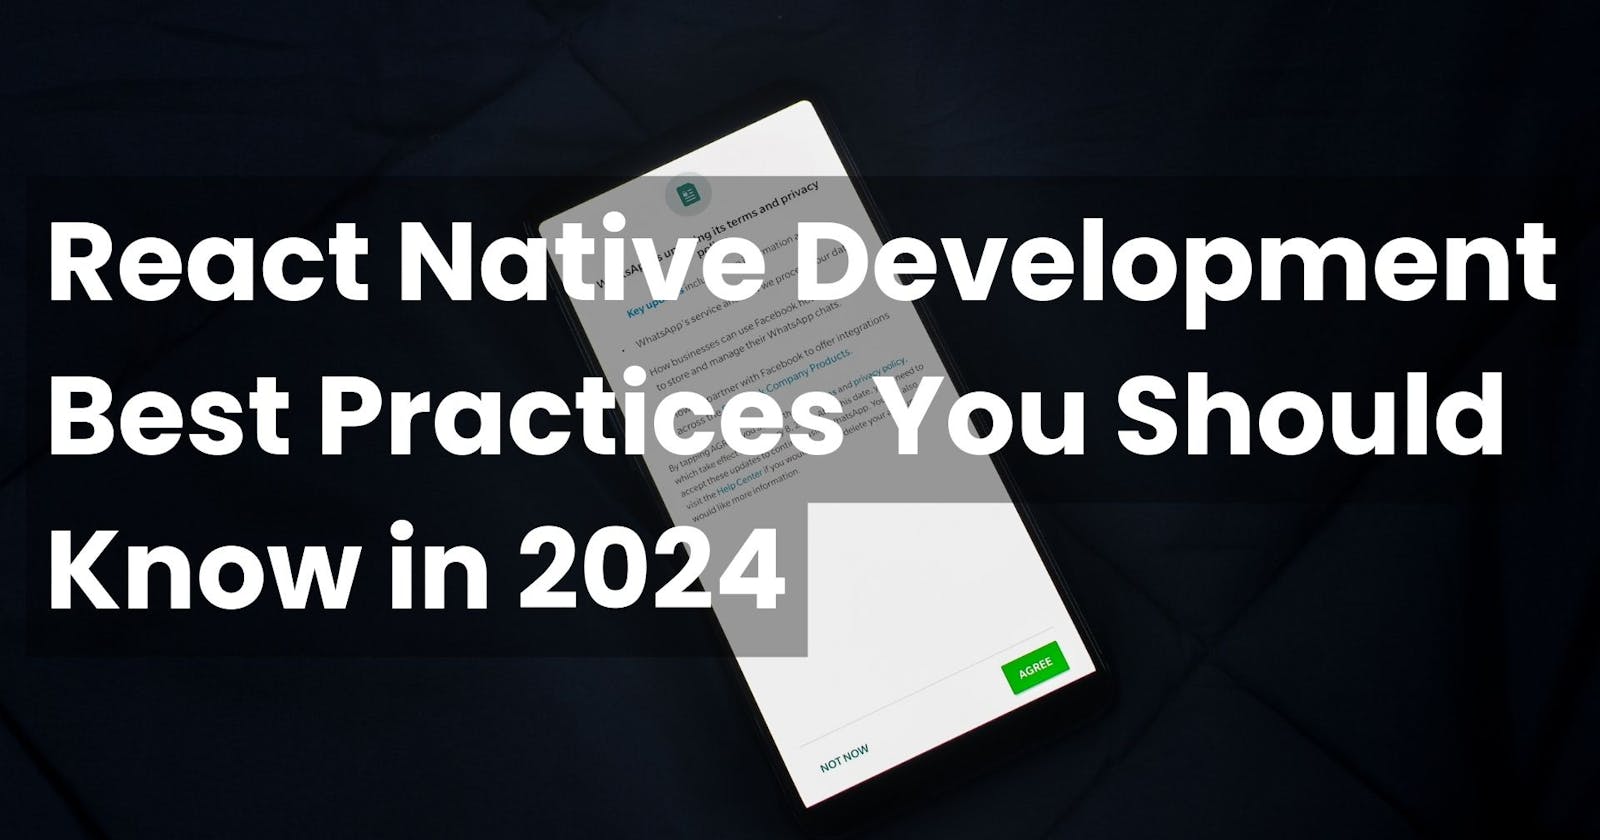 React Native Development Best Practices You Should Know in 2024